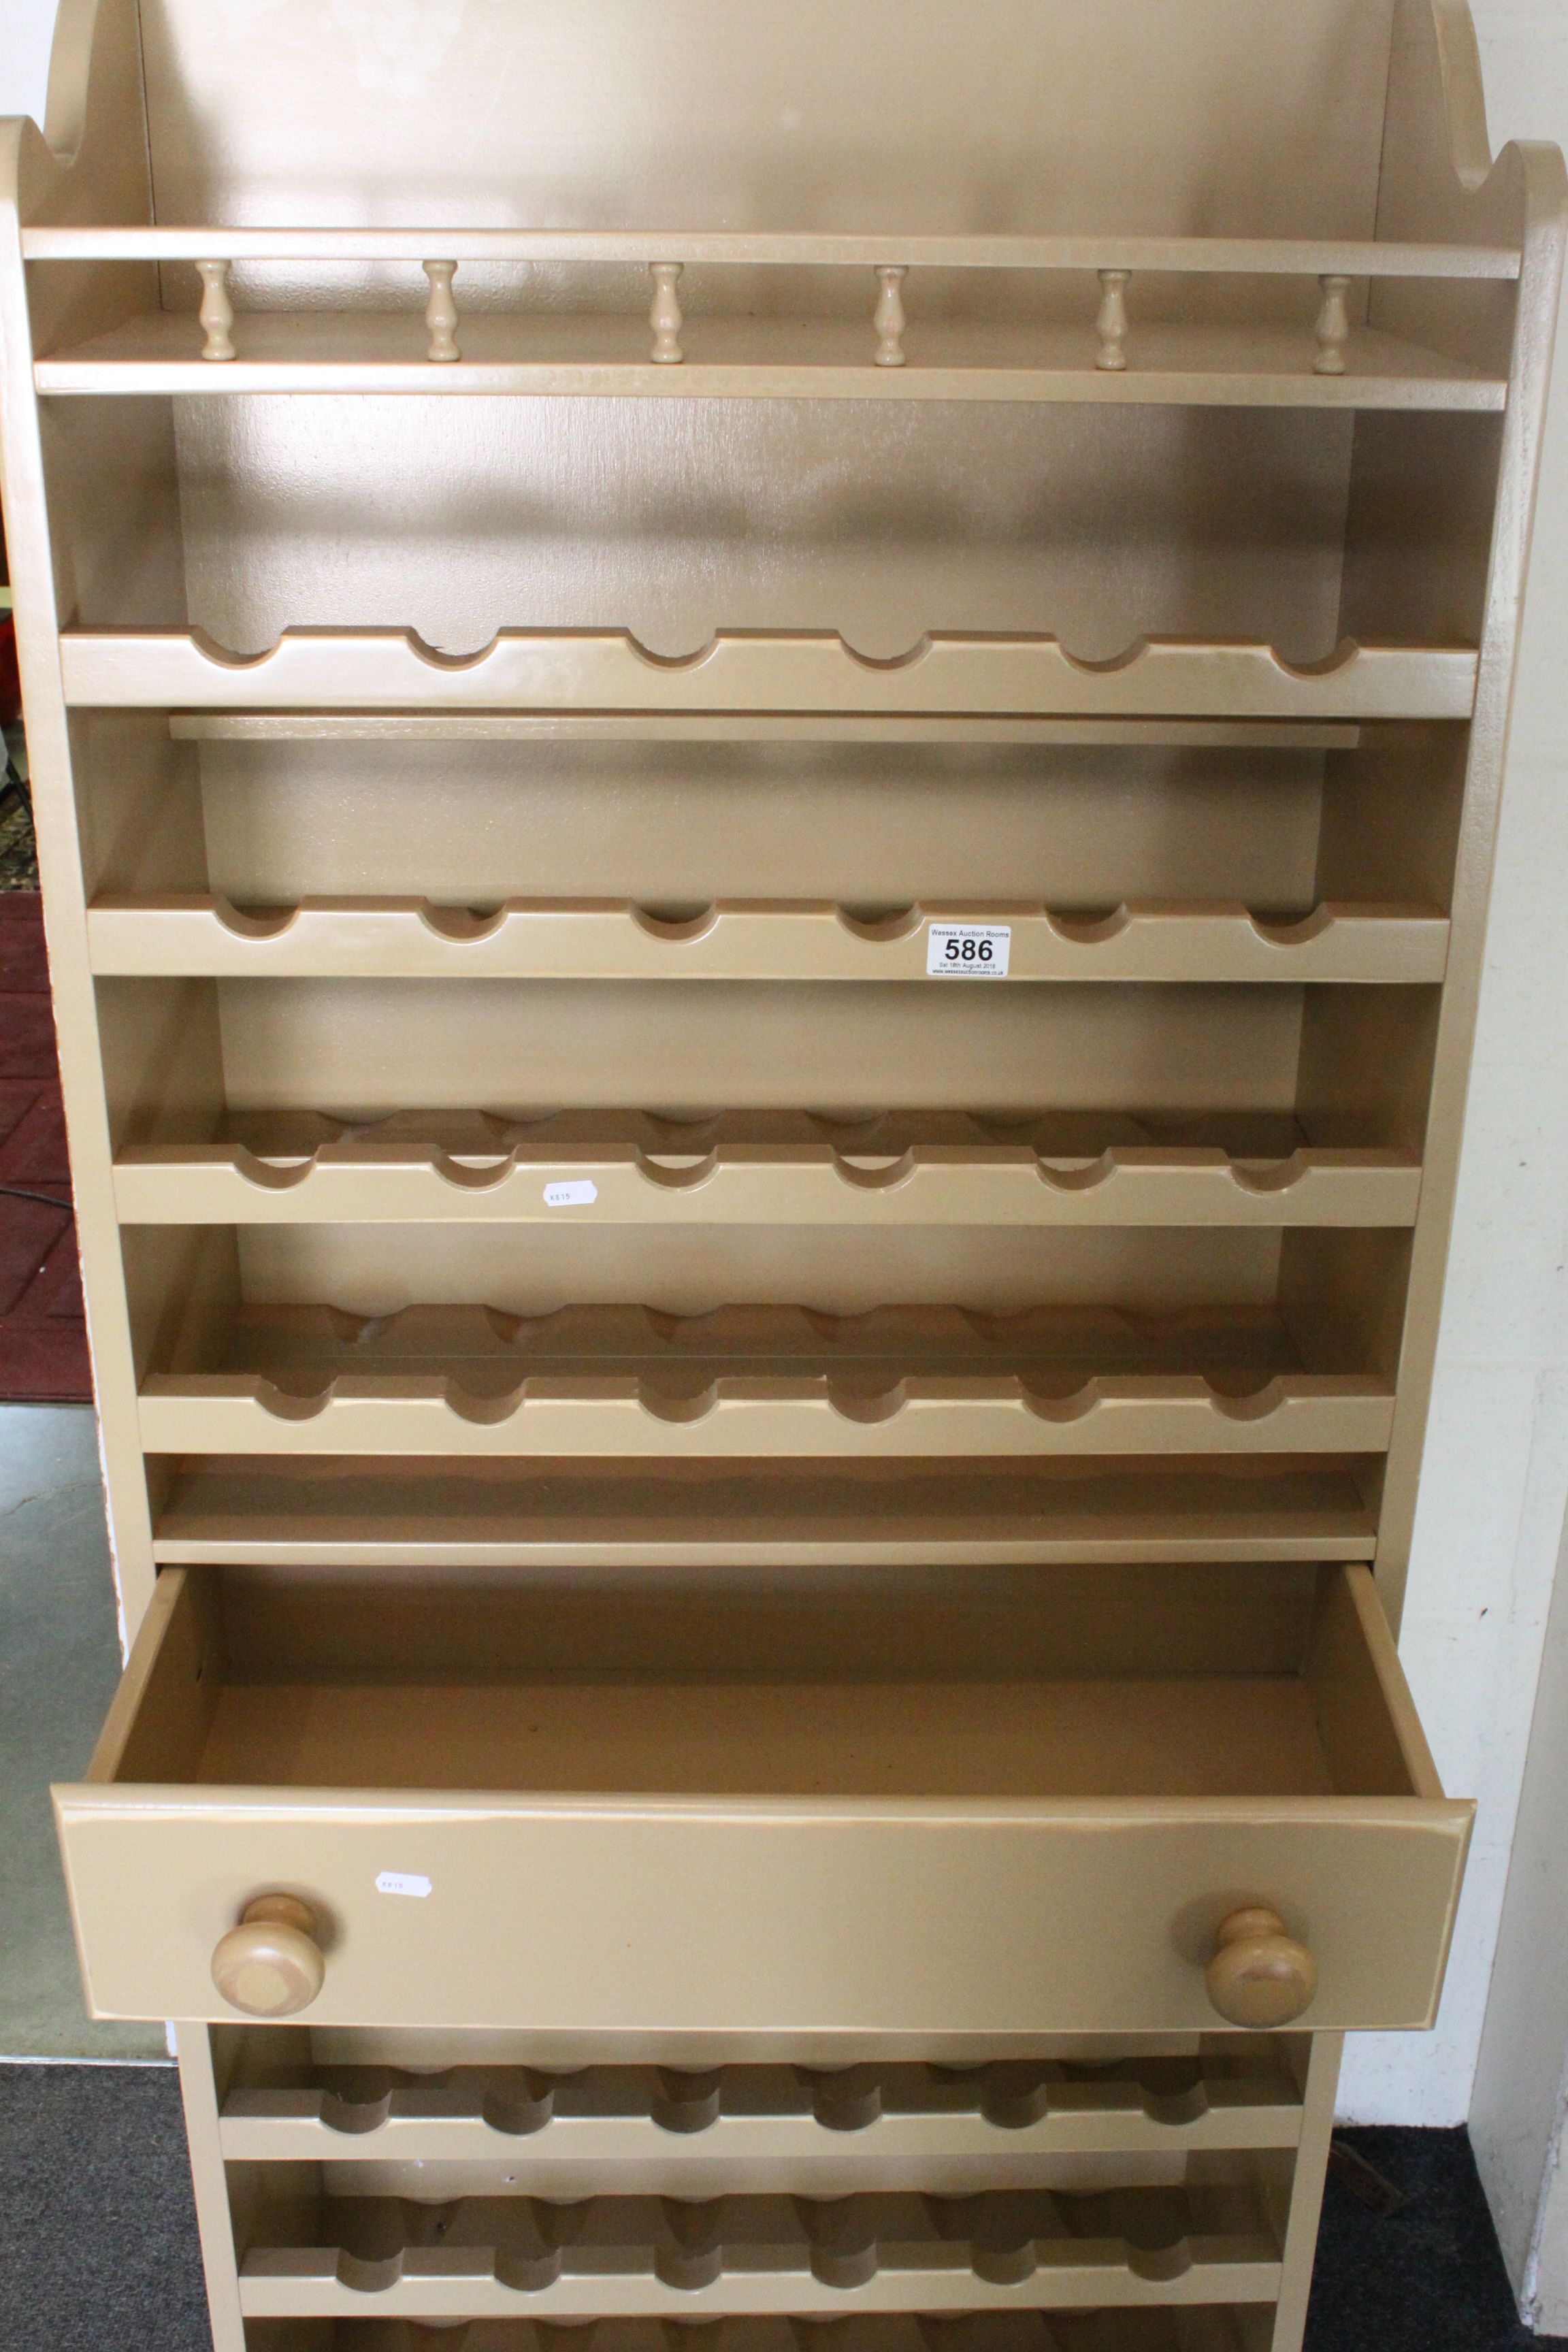 Contemporary 54 Wine Bottle Rack / Storage Unit with central drawer, approx. 169cm high x 68cm wide - Image 5 of 5